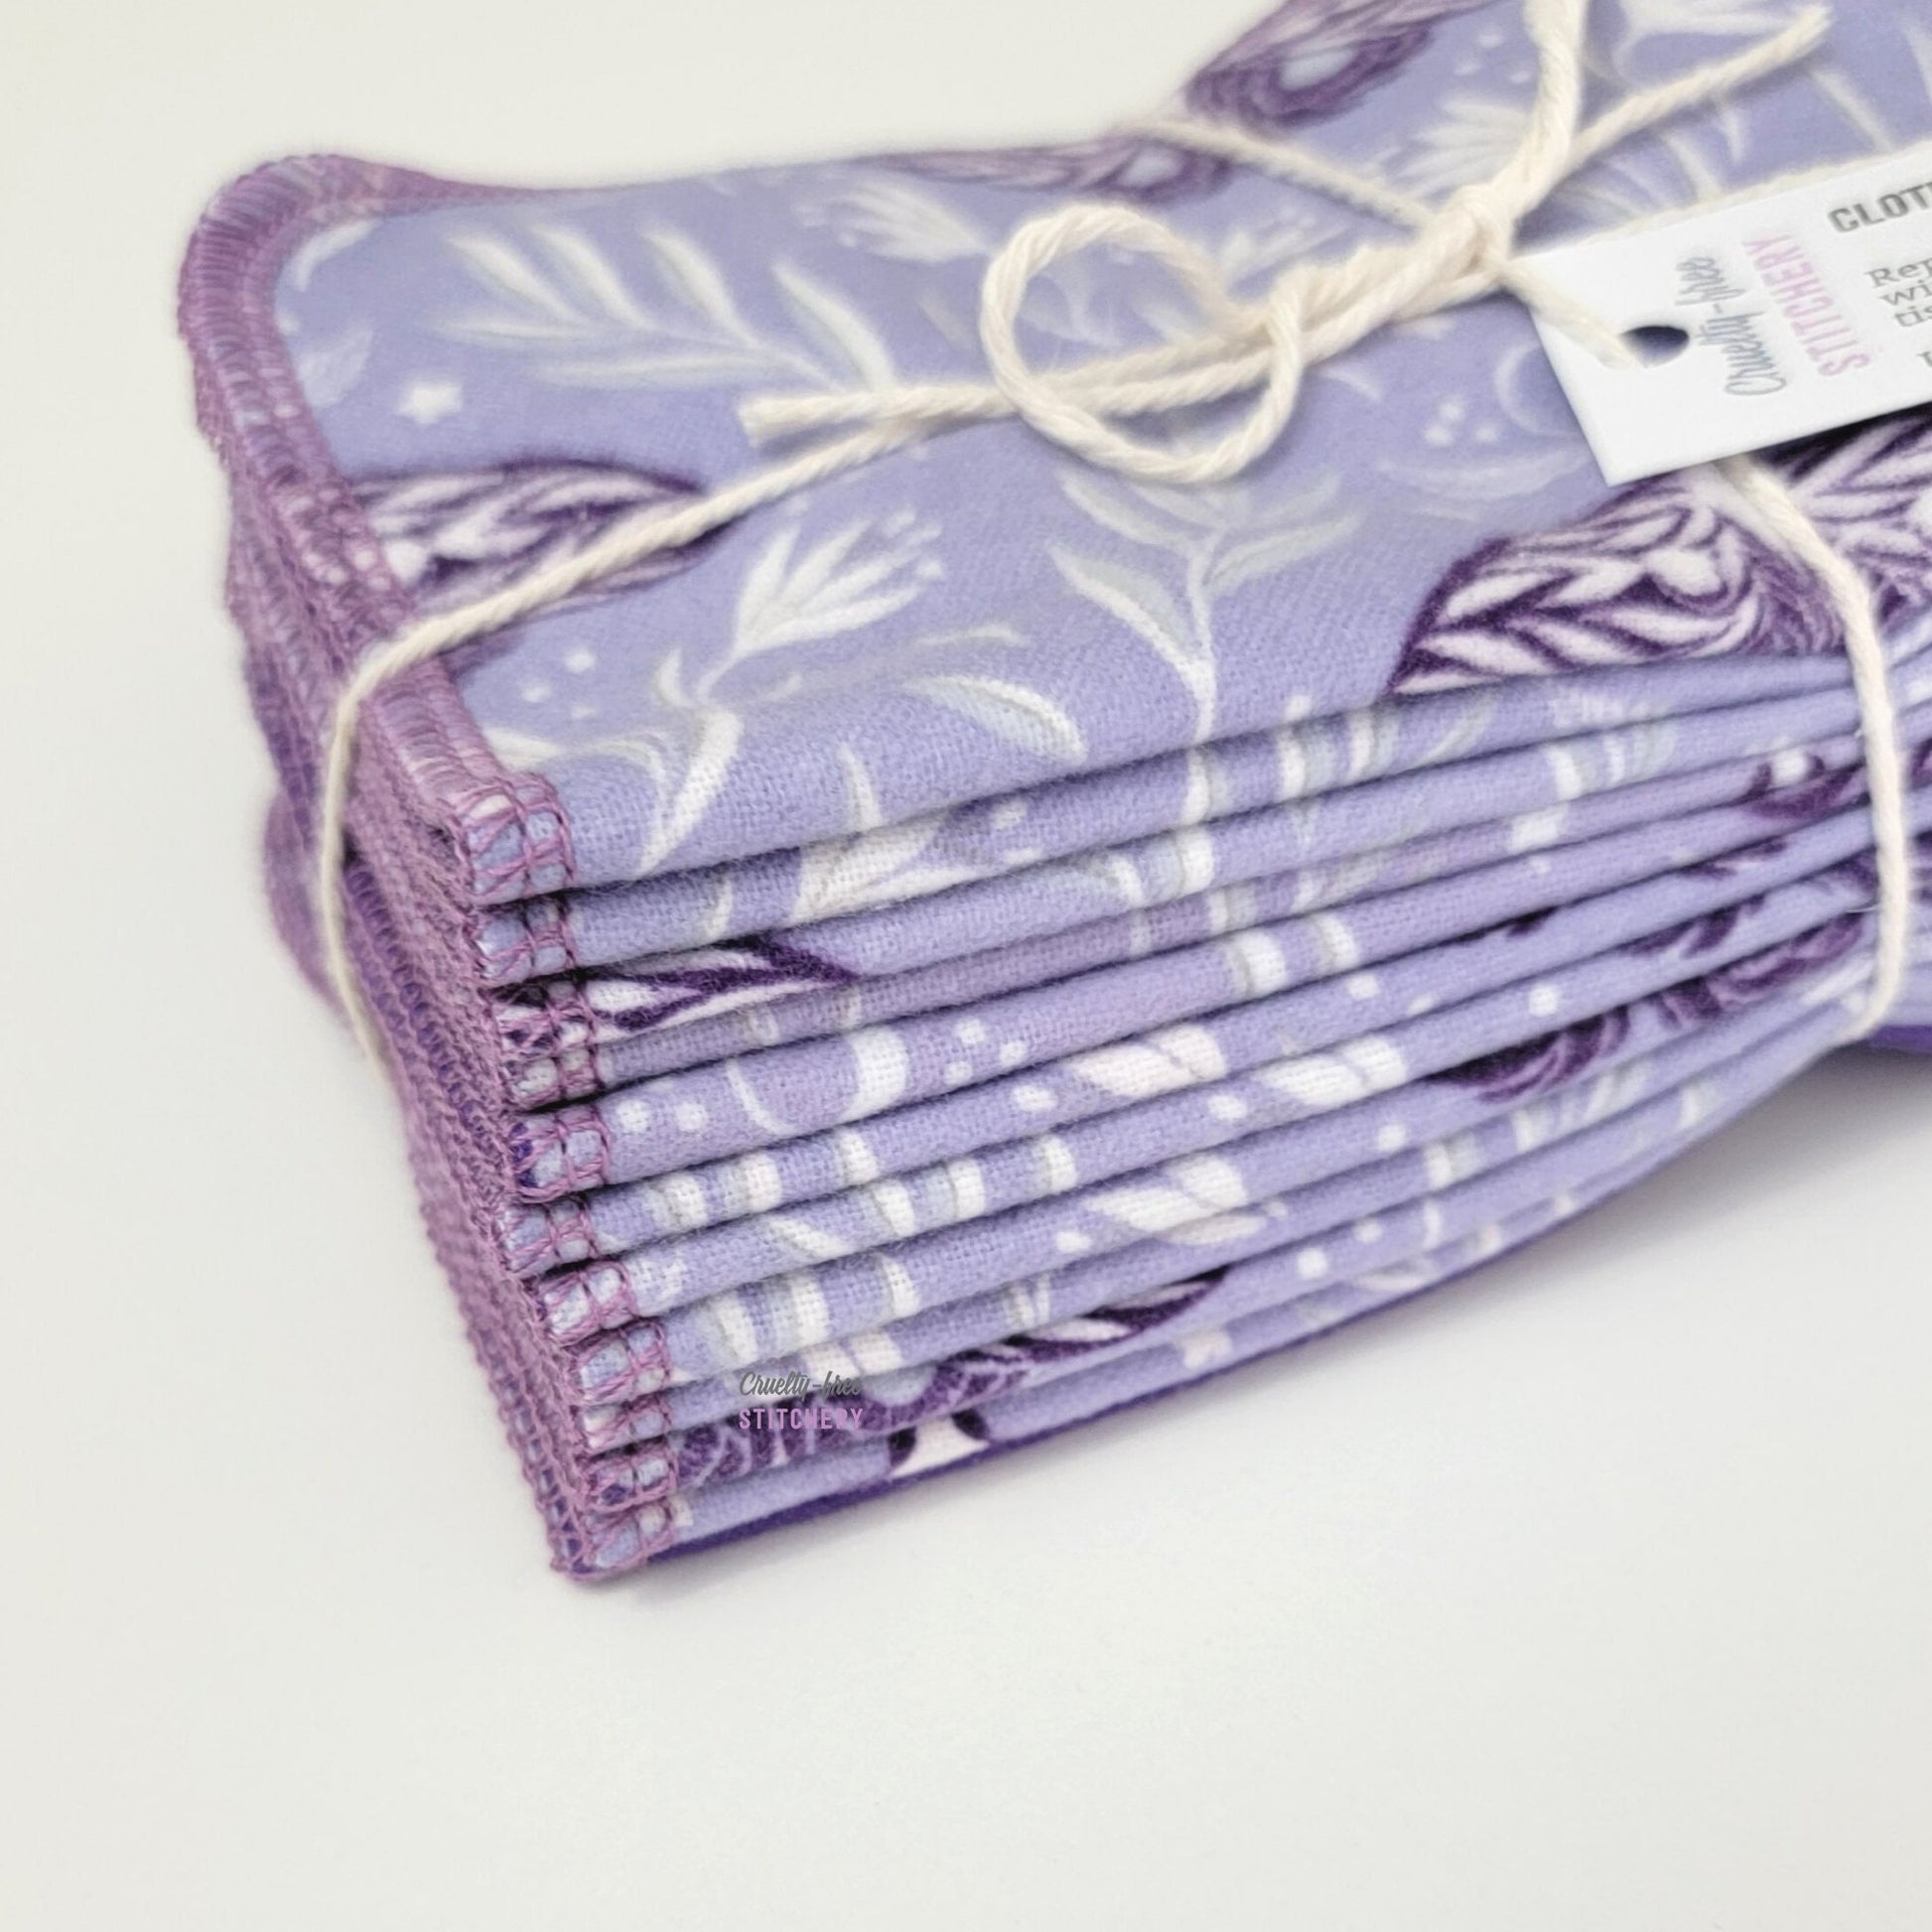 Close-up of the folded purple moths cloth wipes.